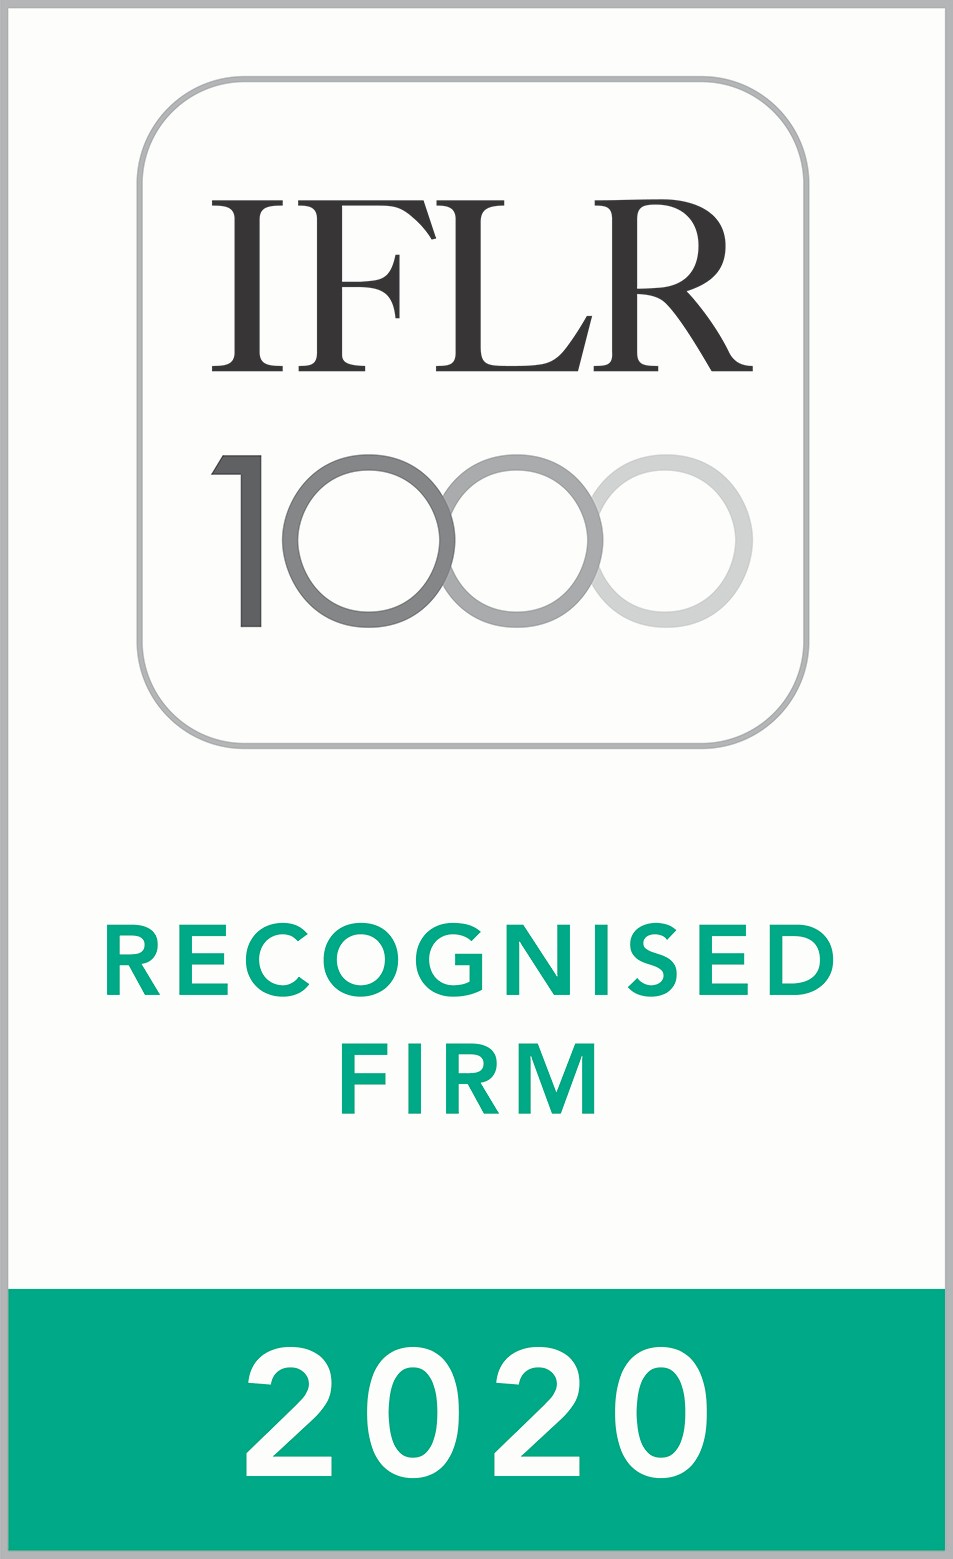 Ranked "Notable Firm" in M&A by IFLR1000, 2020